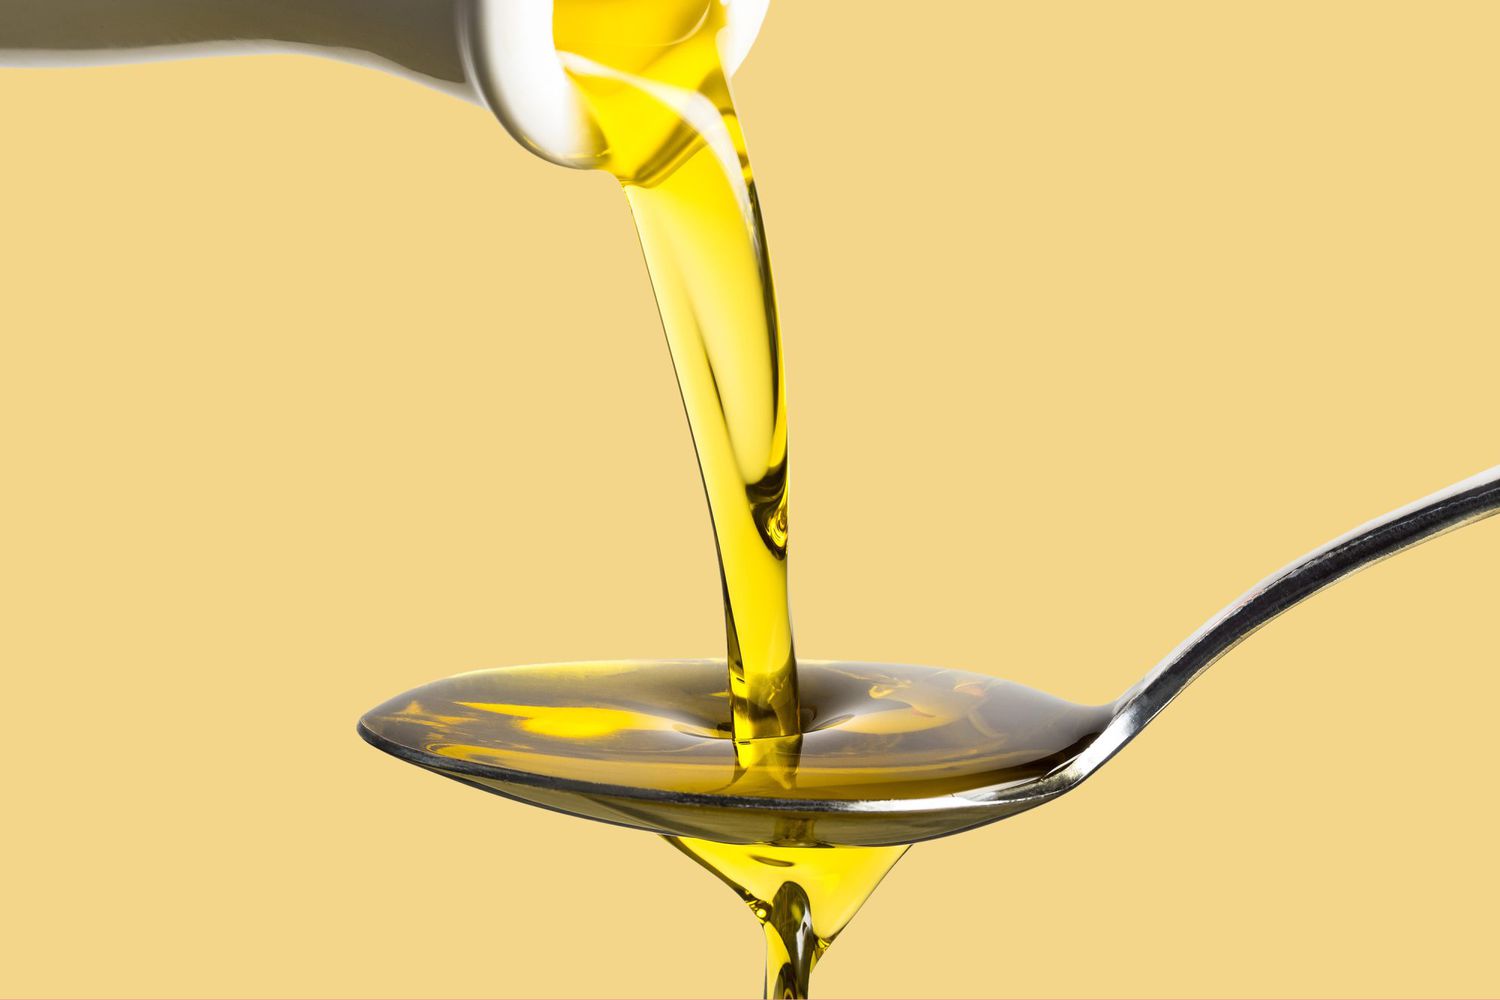 Cooking oil being poured onto a spoon on a yellow background